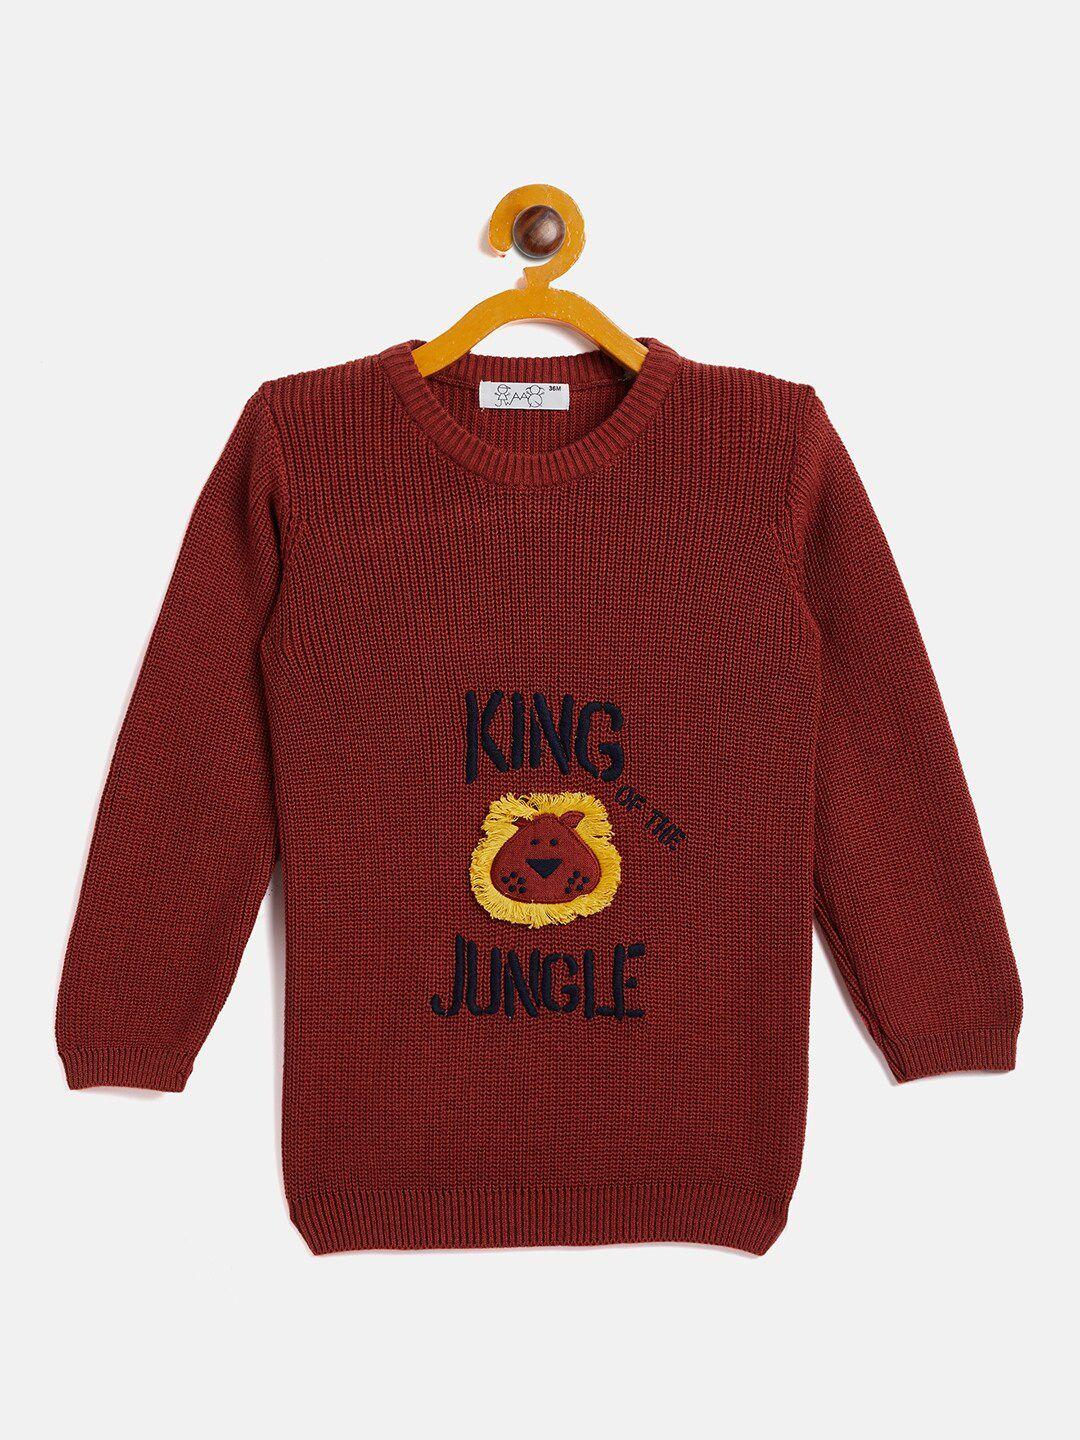 jwaaq-unisex-kids-rust-&-yellow-embroidered-printed-pullover